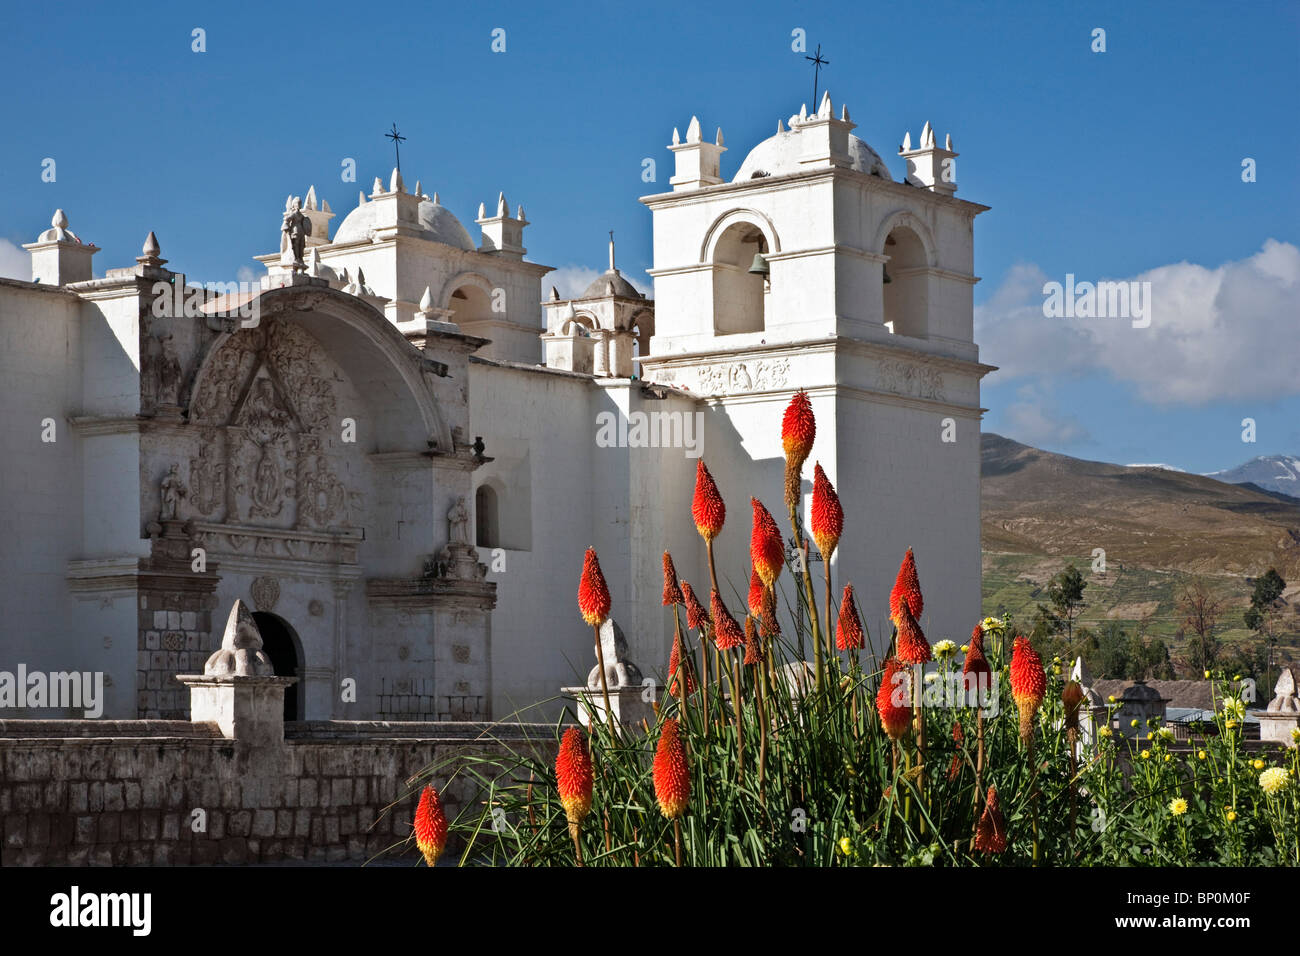 Peru, An attractive C18th church dominates the main square of Yanque, a small rural village in the Colca Canyon. Stock Photo